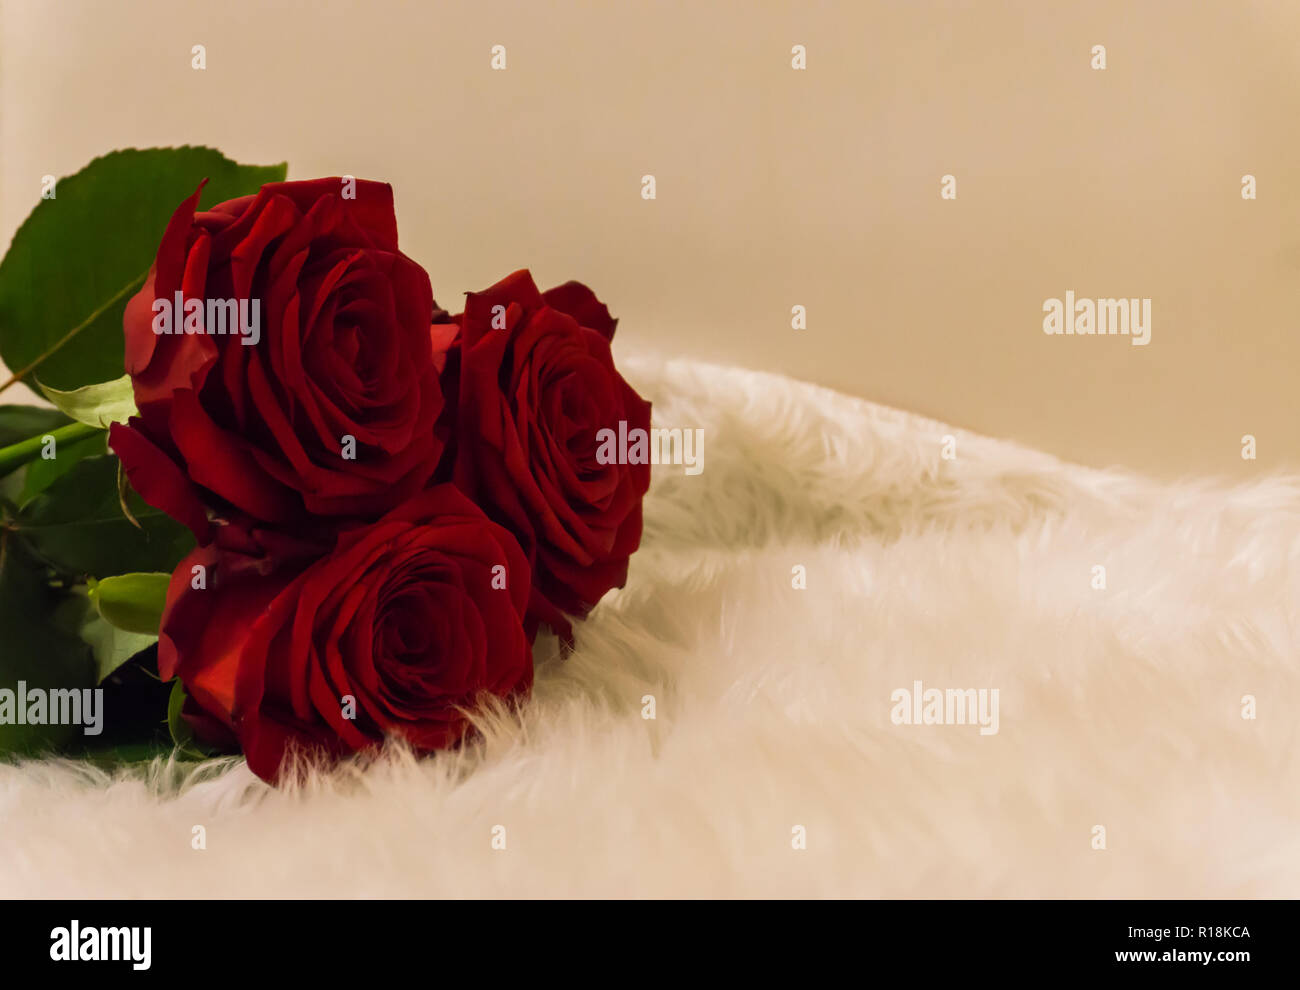 bouquet of red roses laying on a white carpet romantic symbol of love and appreciation on valentines day Stock Photo